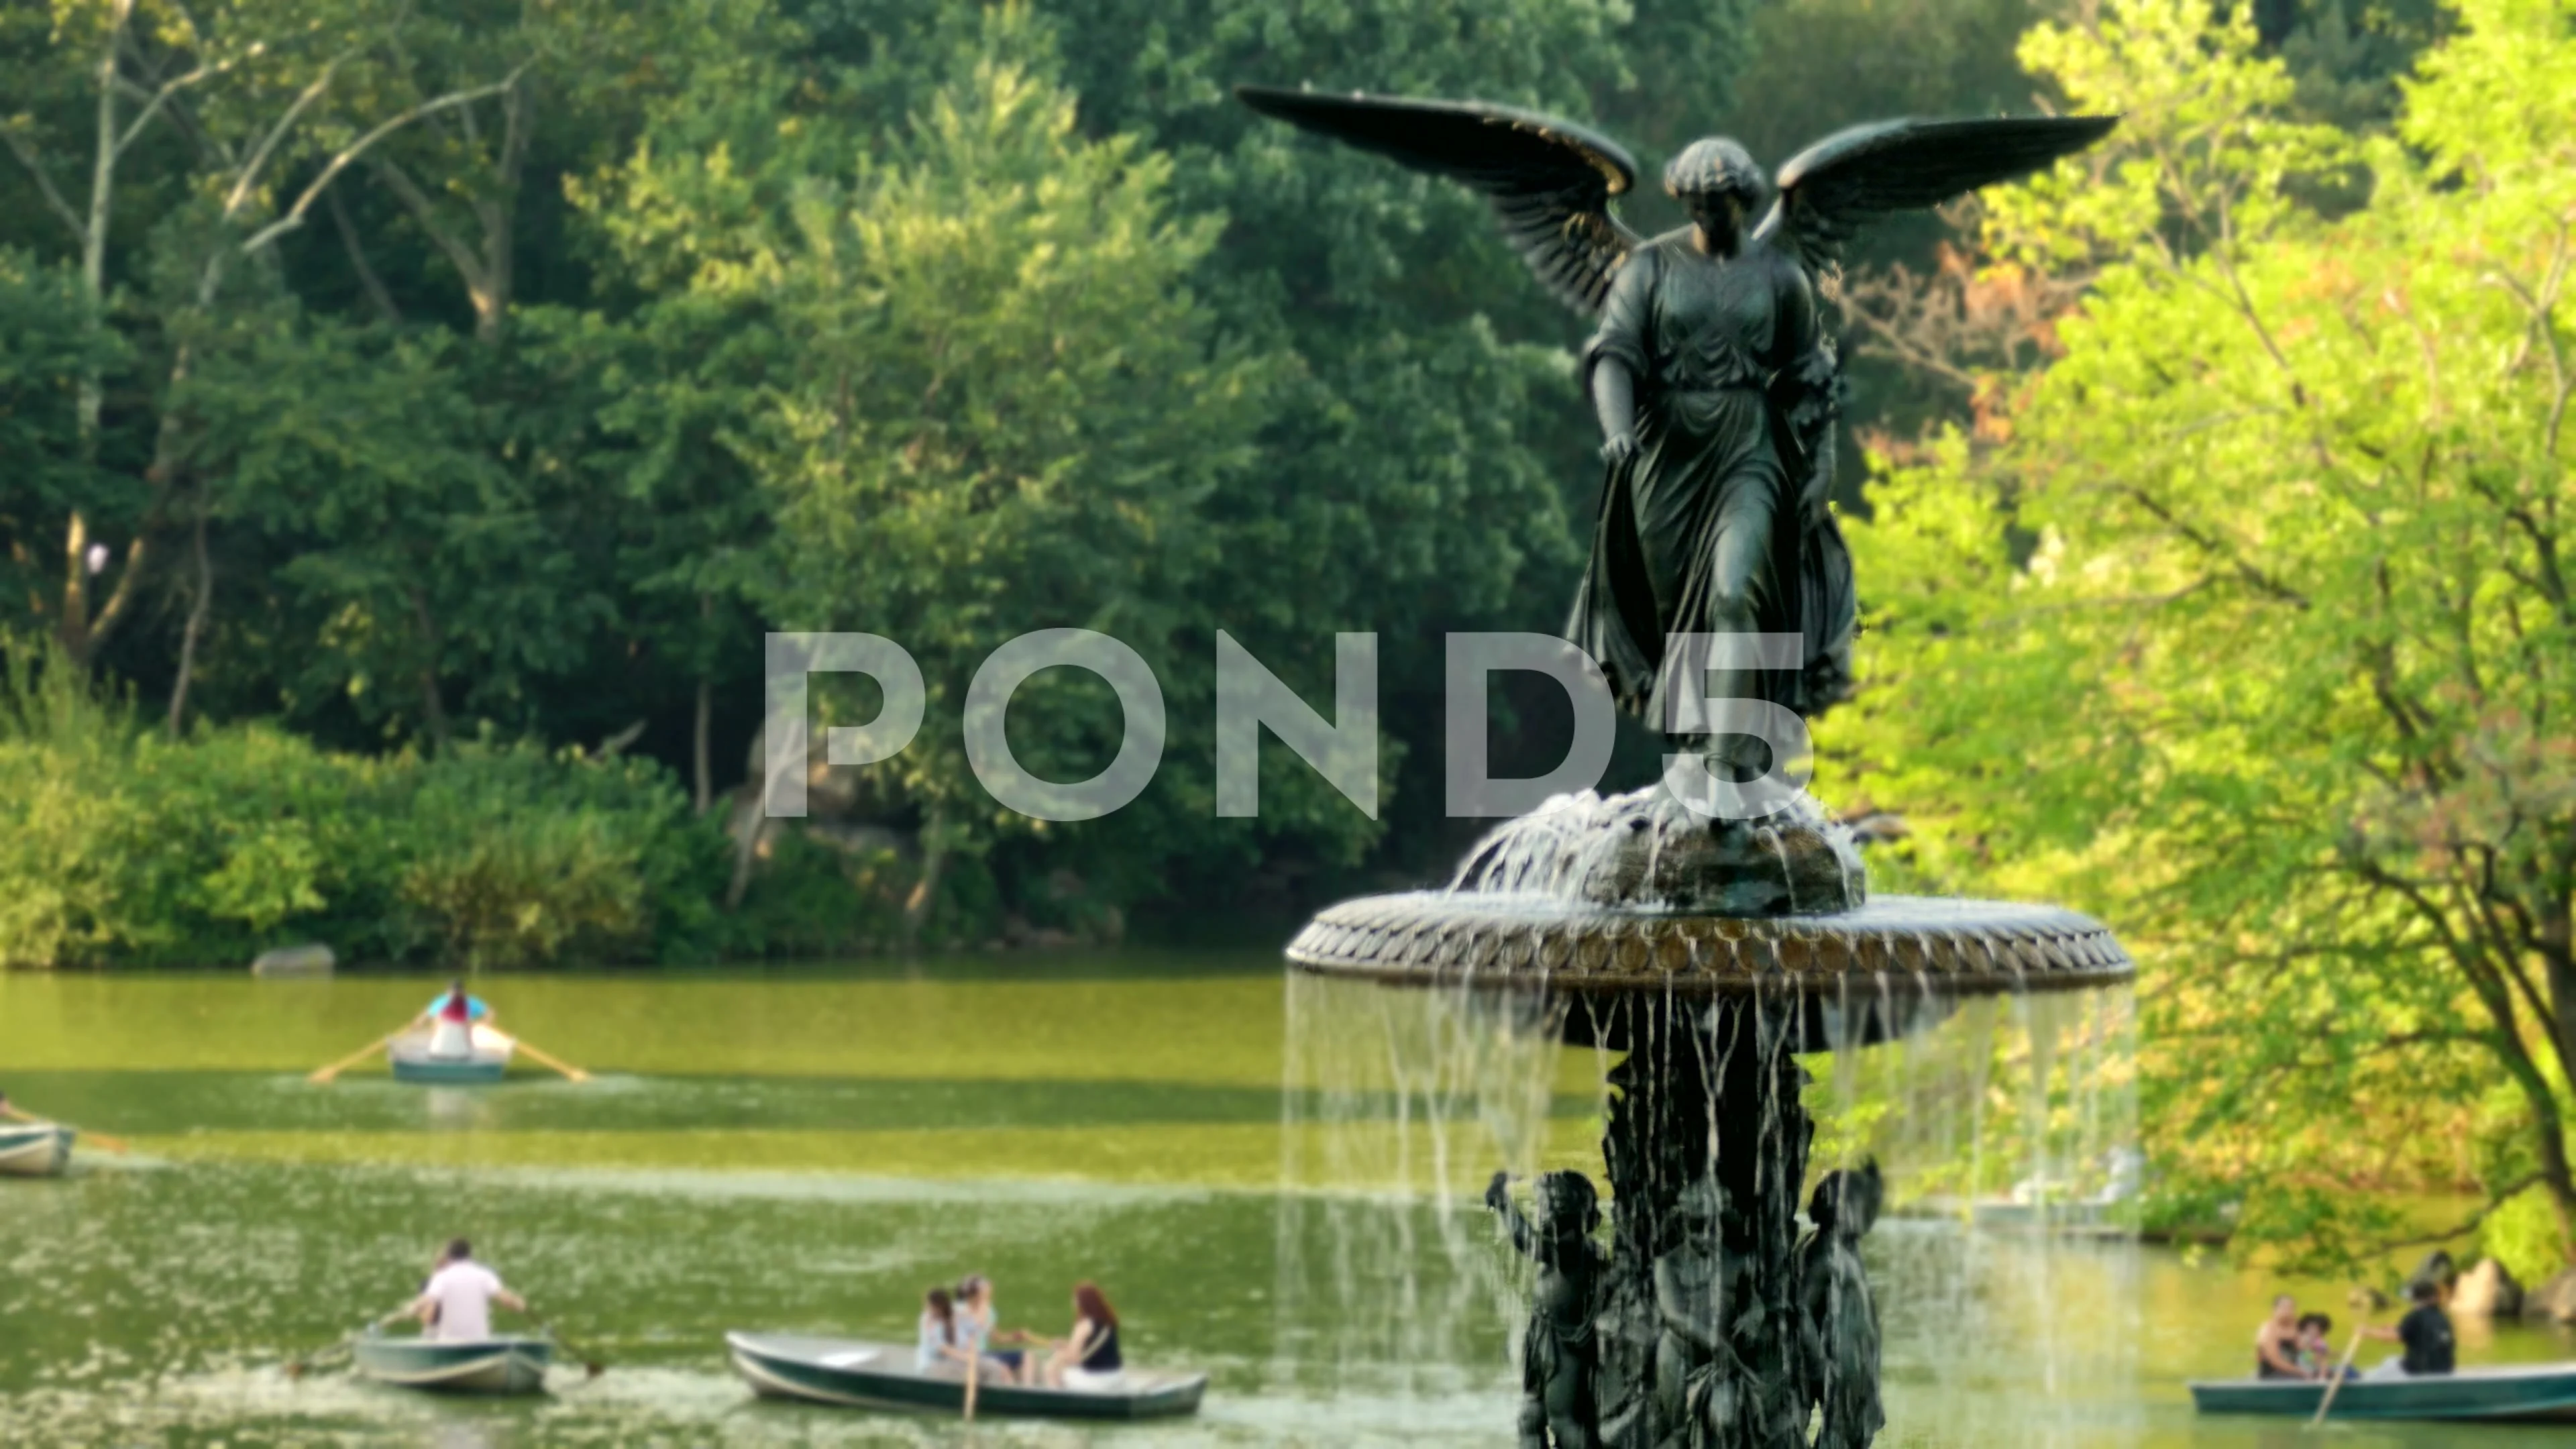 Bethesda Fountain Angel of the Waters, Central Park, NYC